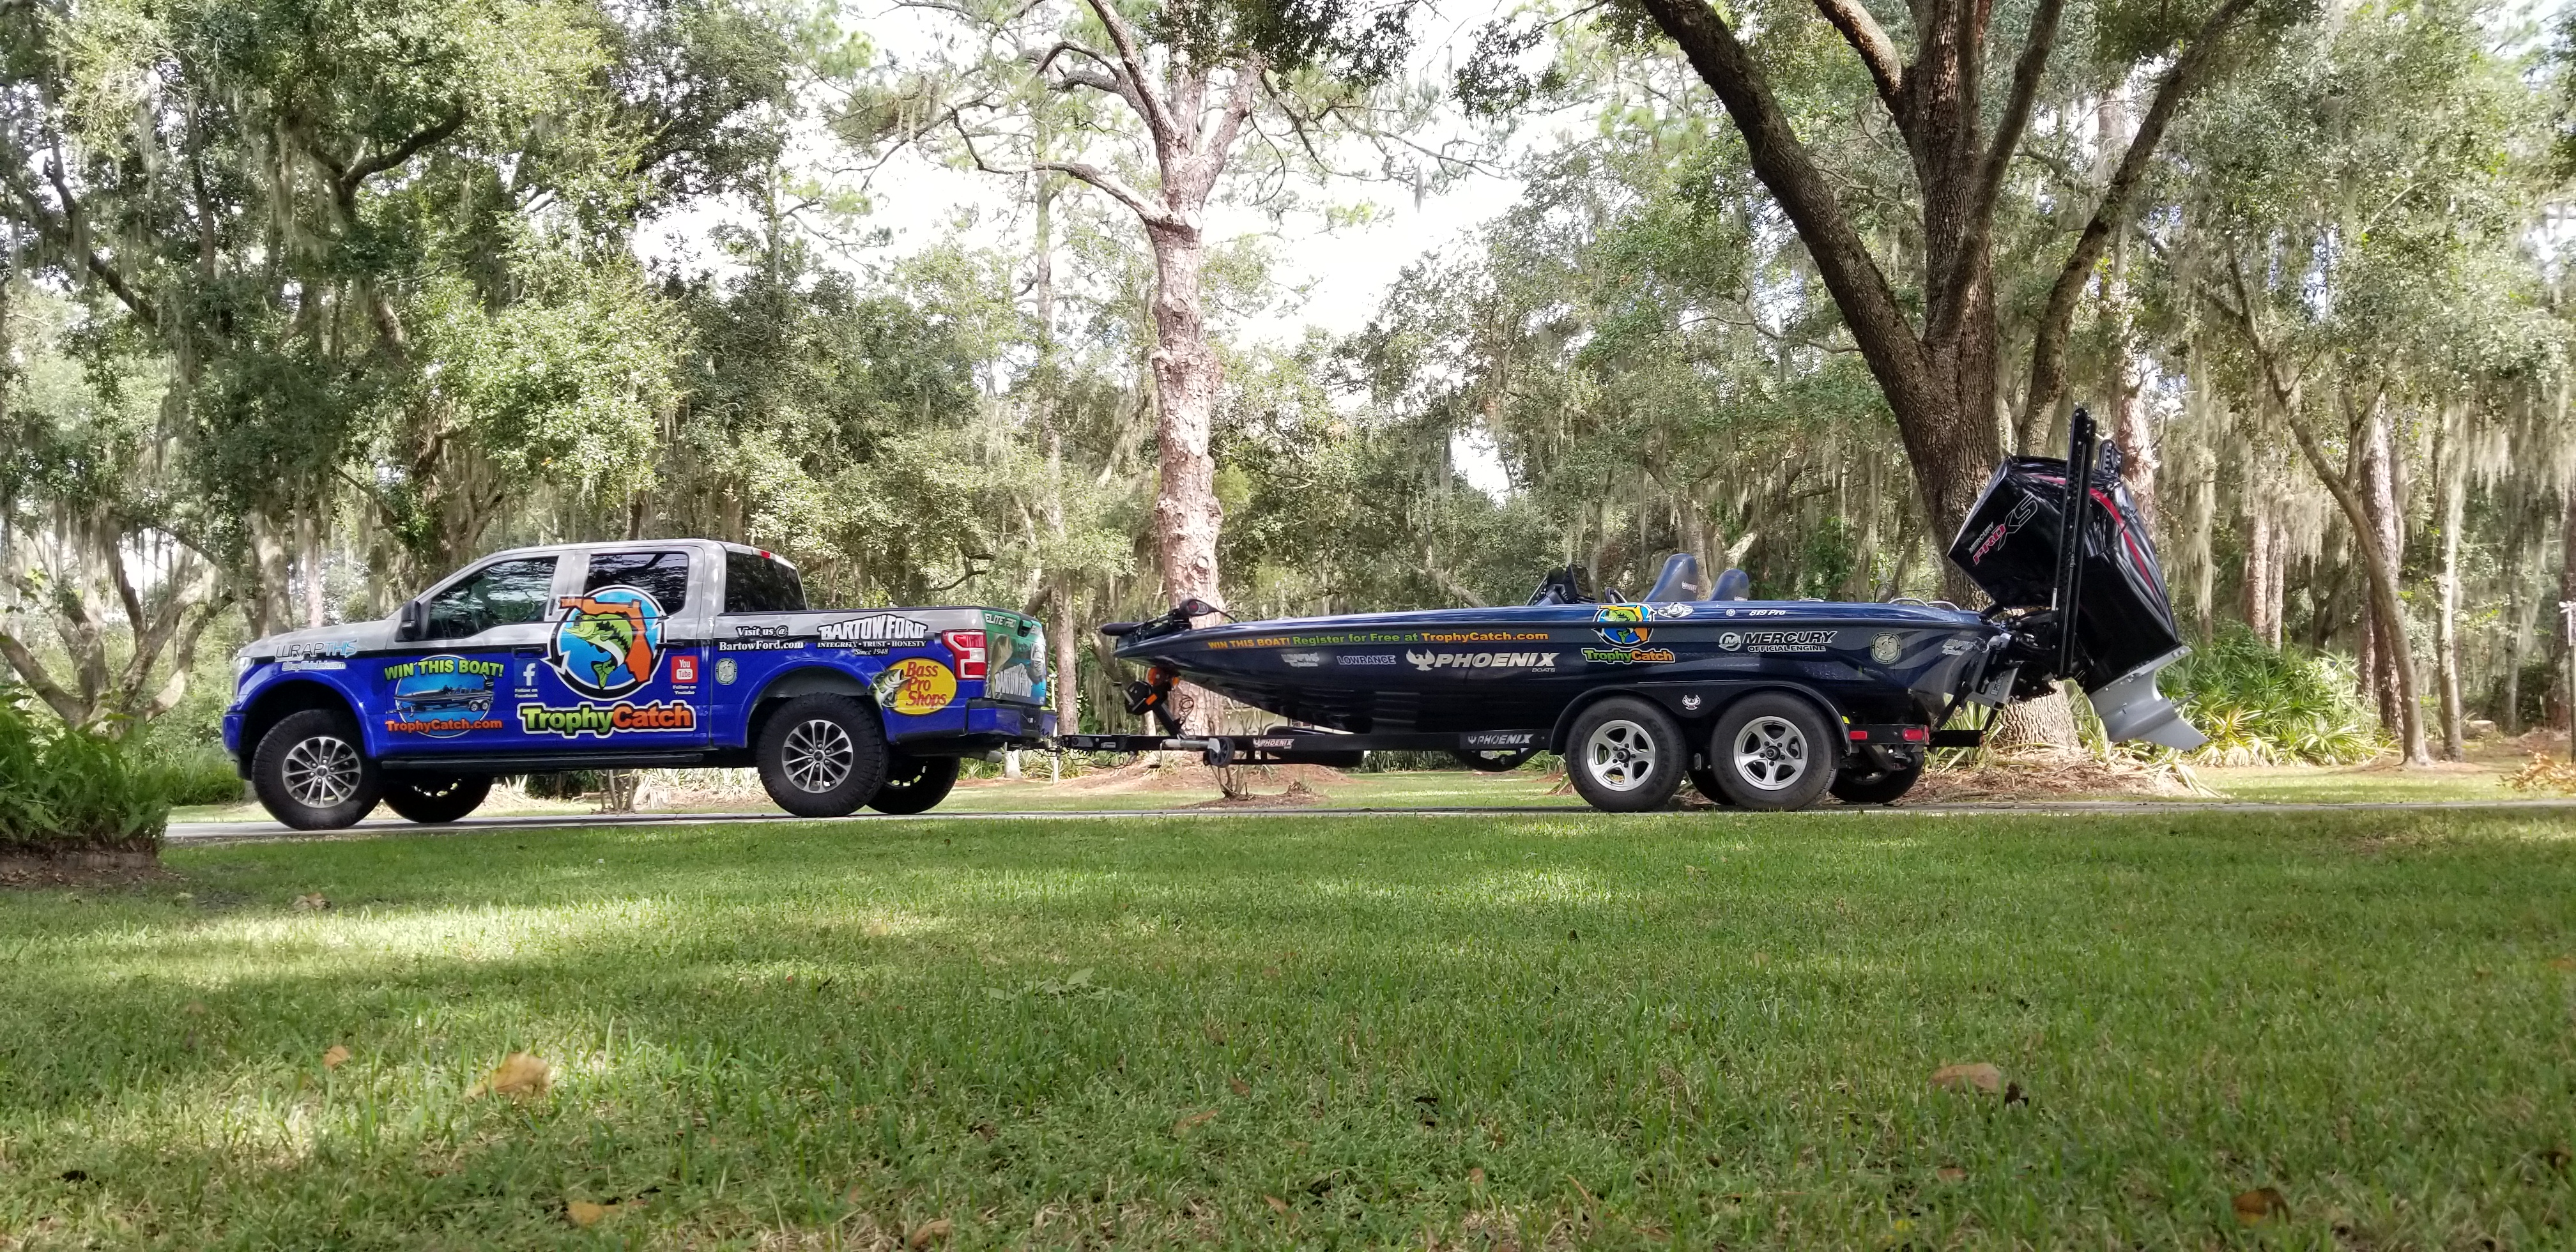 TrophyCatch partner Bartow Ford drives conservation forward